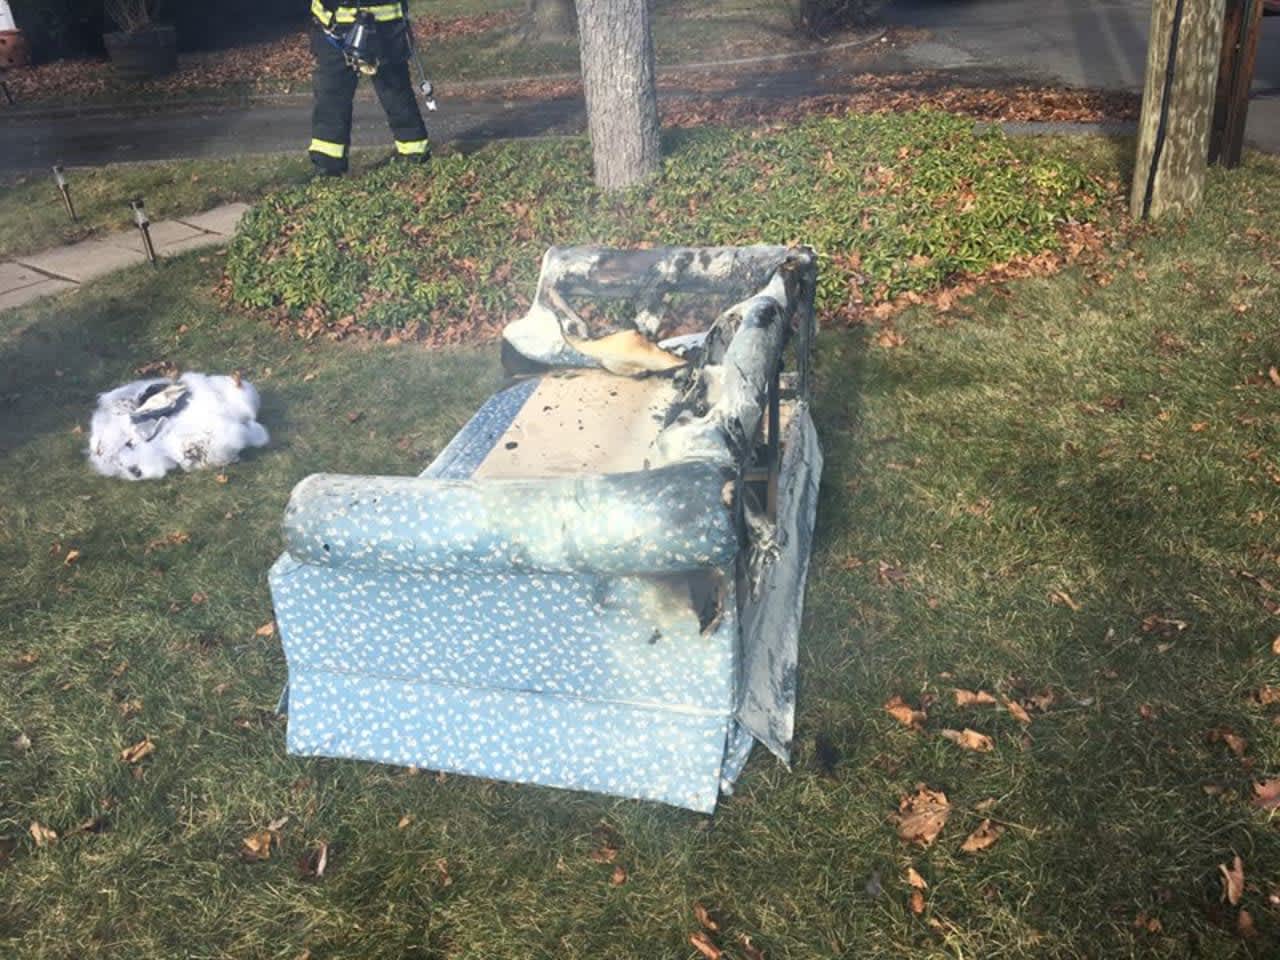 Ramapo police extinguished a fire in Sloatsburg on Tuesday.